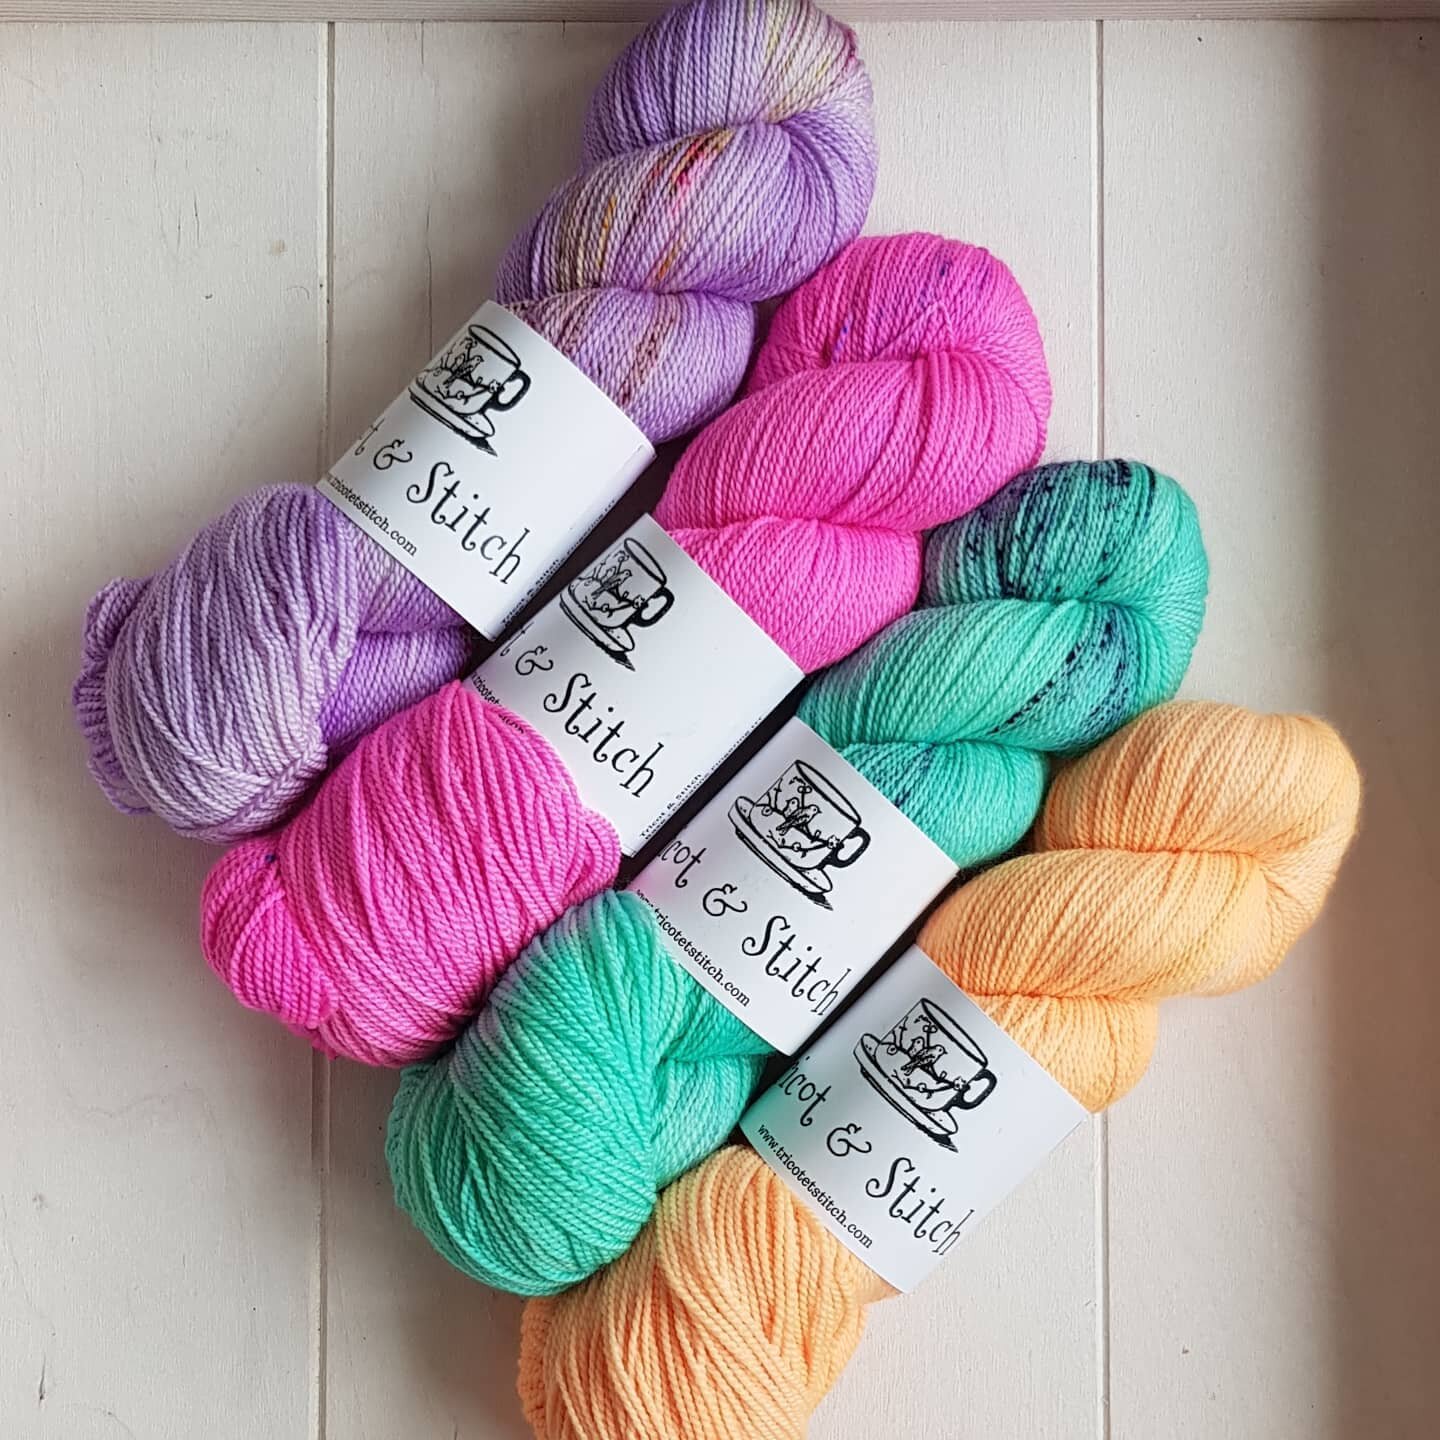 💜💕 Shop update | Mise &agrave; jour de la boutique 💜💕

Epic shop update post fiber festival: check! The shop is full of yarn, kits and Emma Ball bags and goodies - the link is in my bio 😁🎉 the English version of the podcast will be up tomorrow
